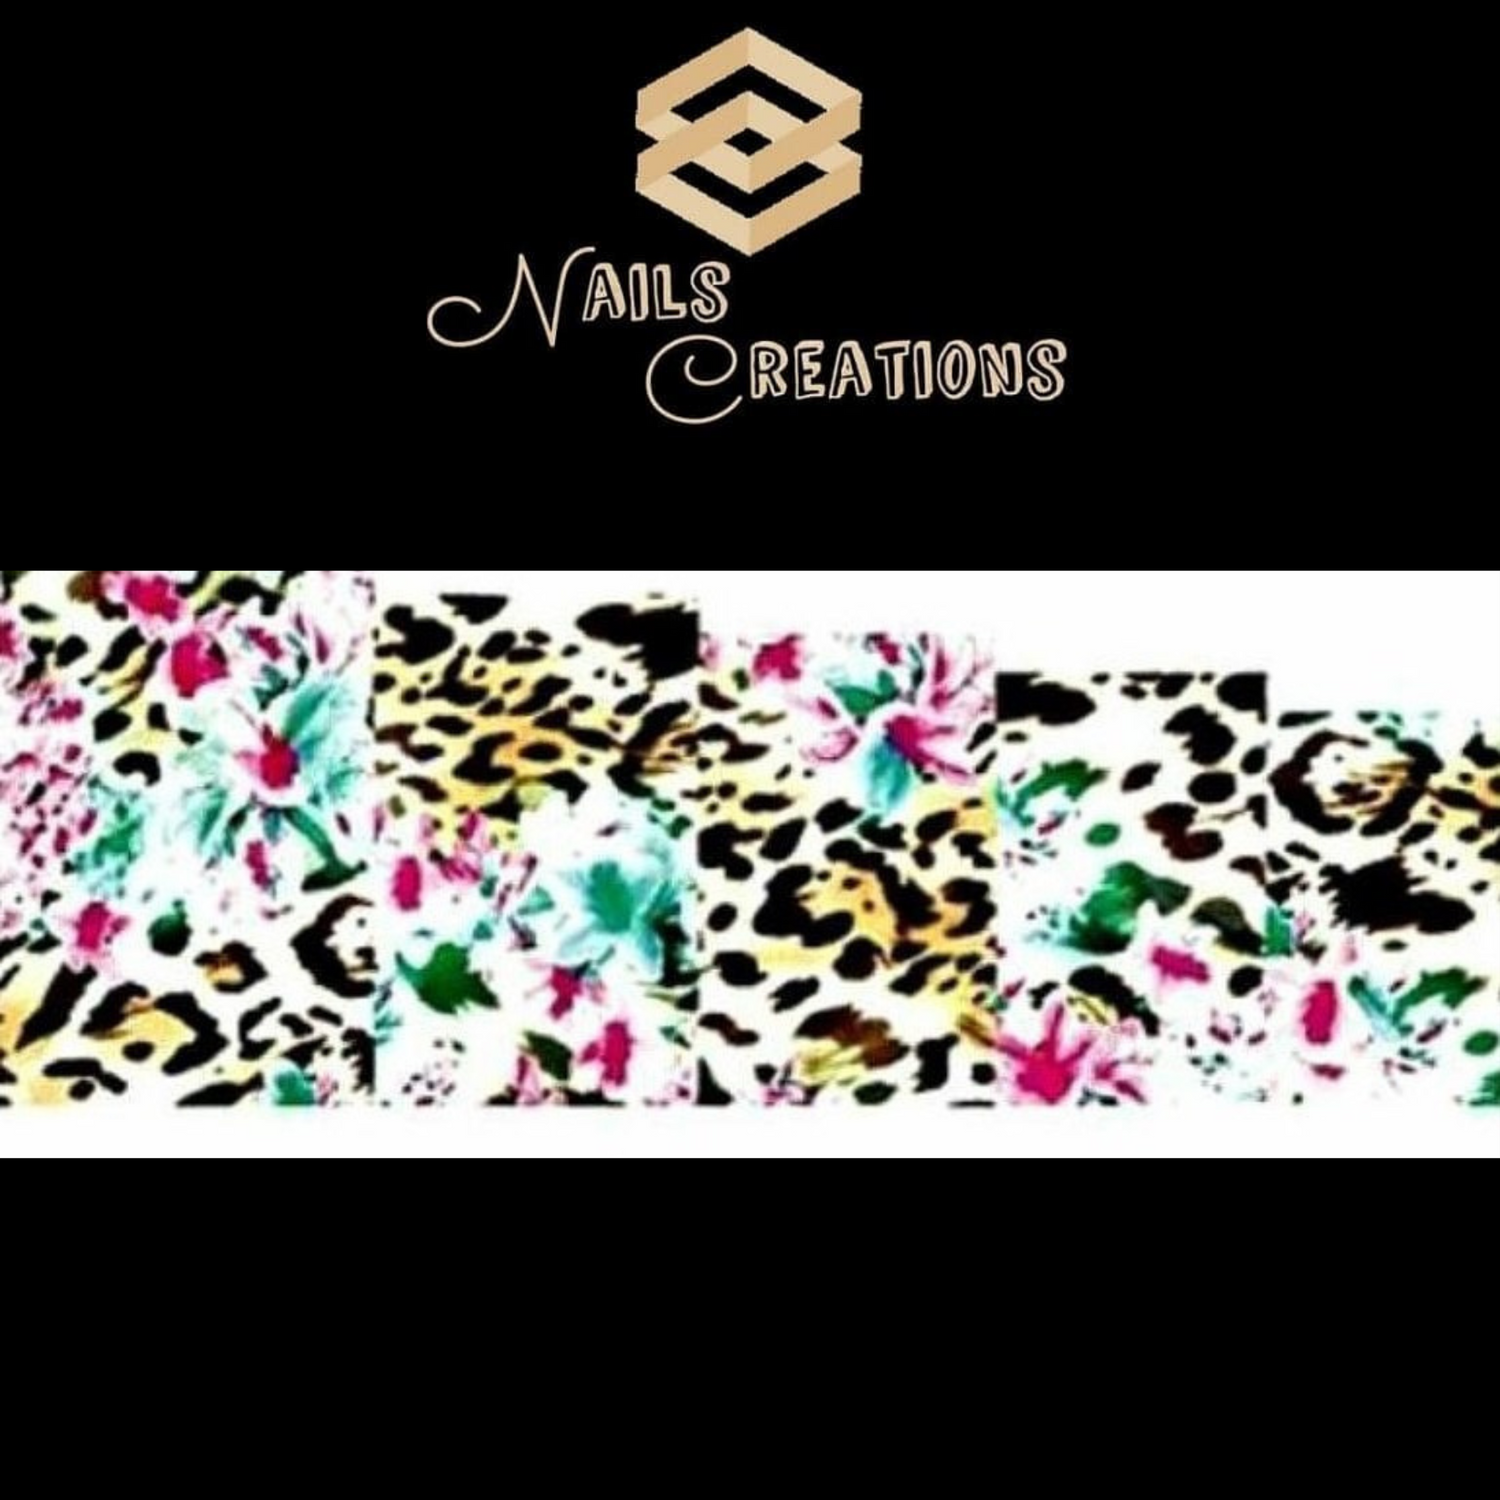 Animal Print with Flowers Full Nail Art Waterslide Decal Design - Nails Creations